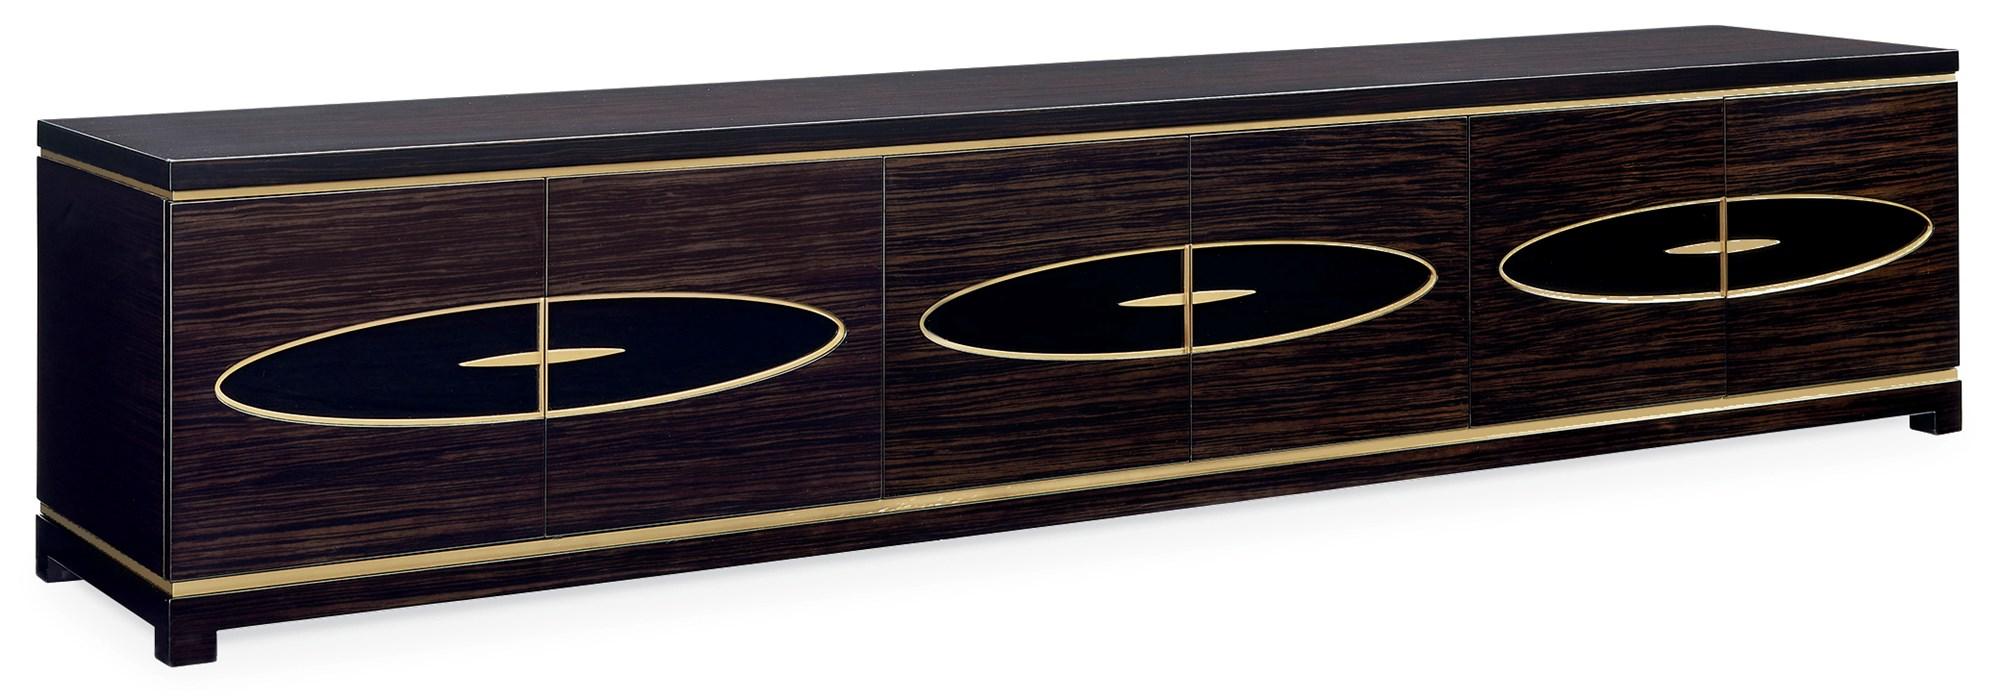 Contemporary Console Table THE METROPOLIS ENTERTAINMENT CONSOLE SIG-418-531 in Ebony, Gold 